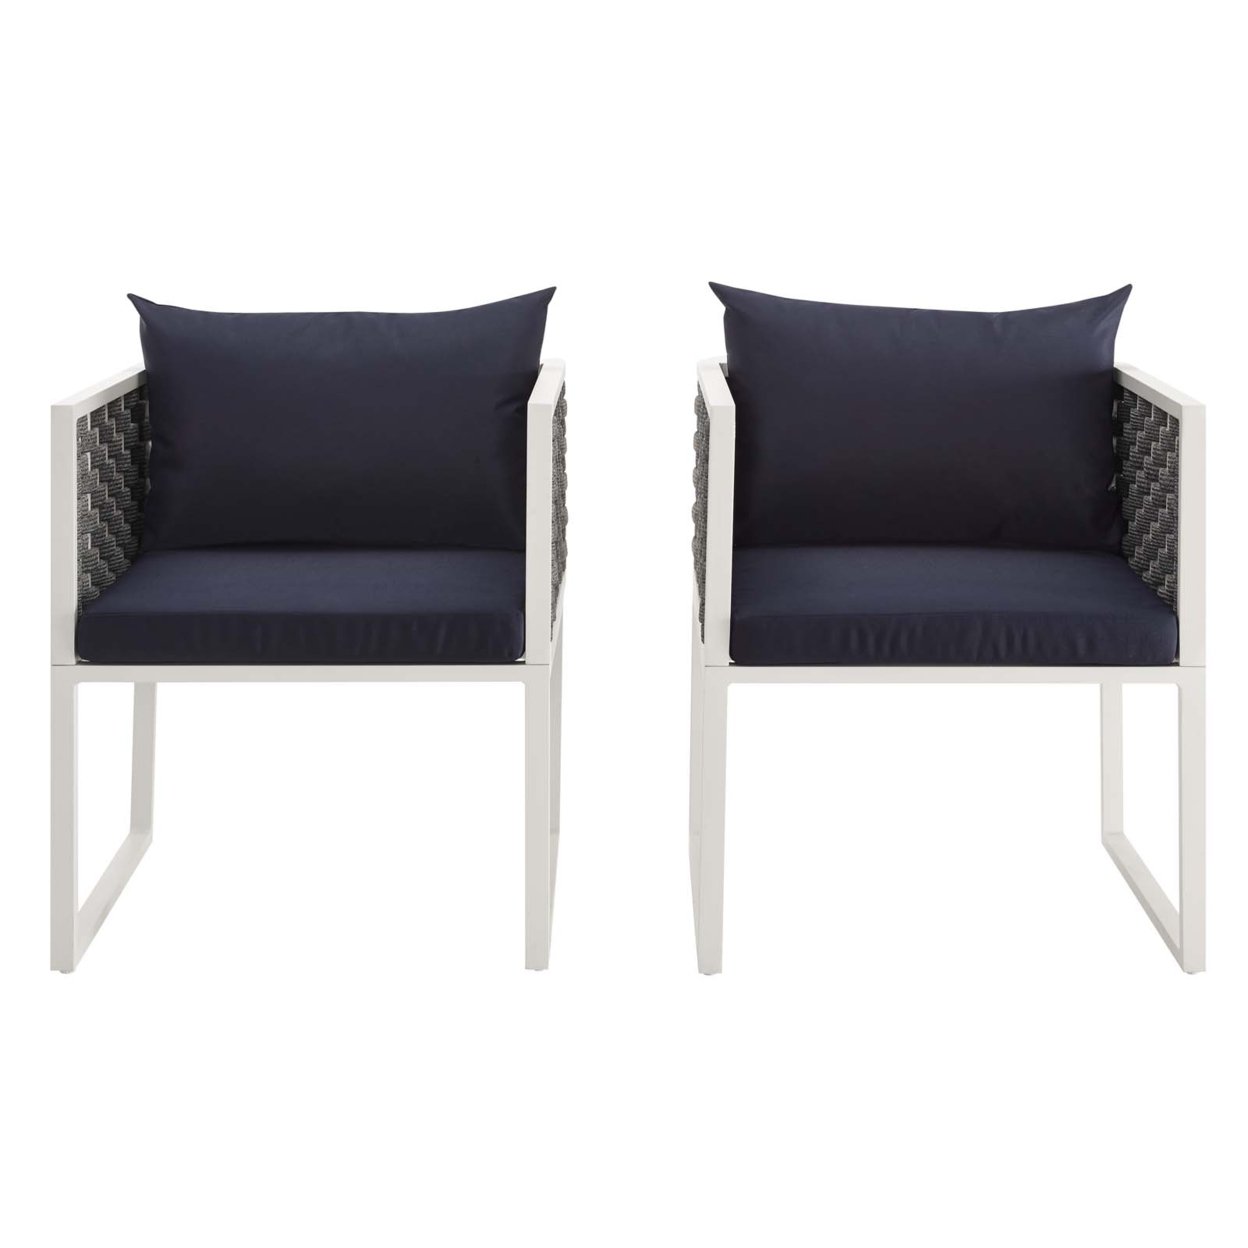 Stance Dining Armchair Outdoor Patio Aluminum Set Of 2, White Navy